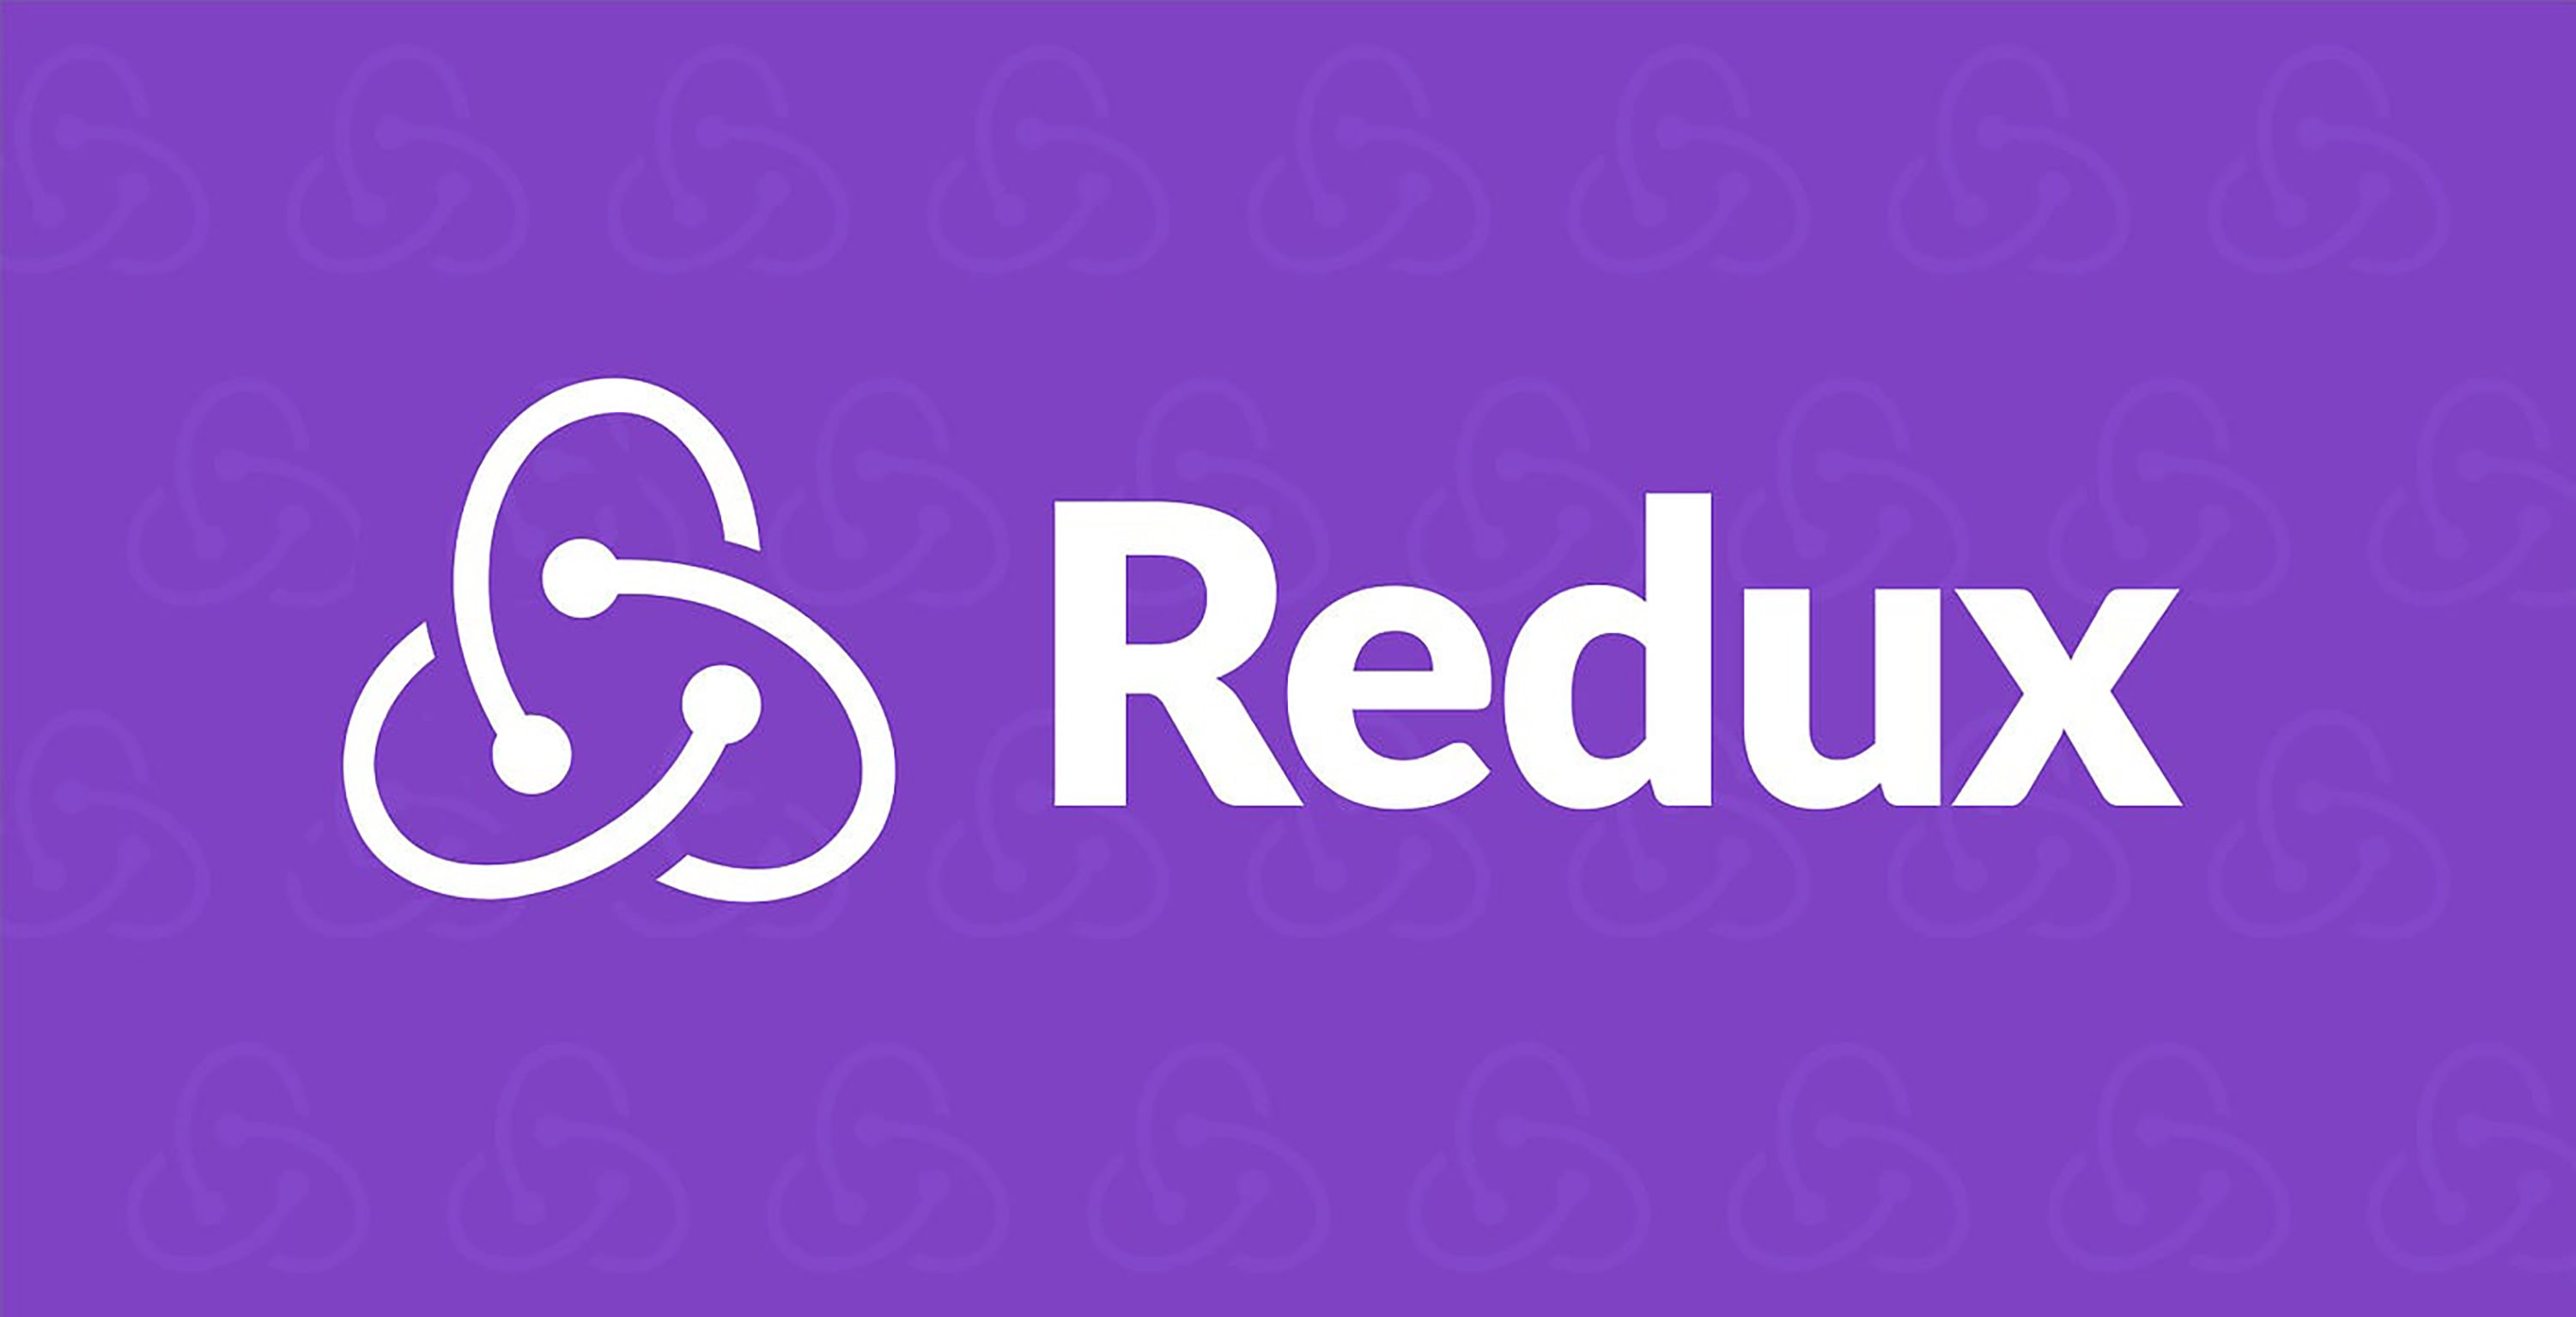 What is Redux